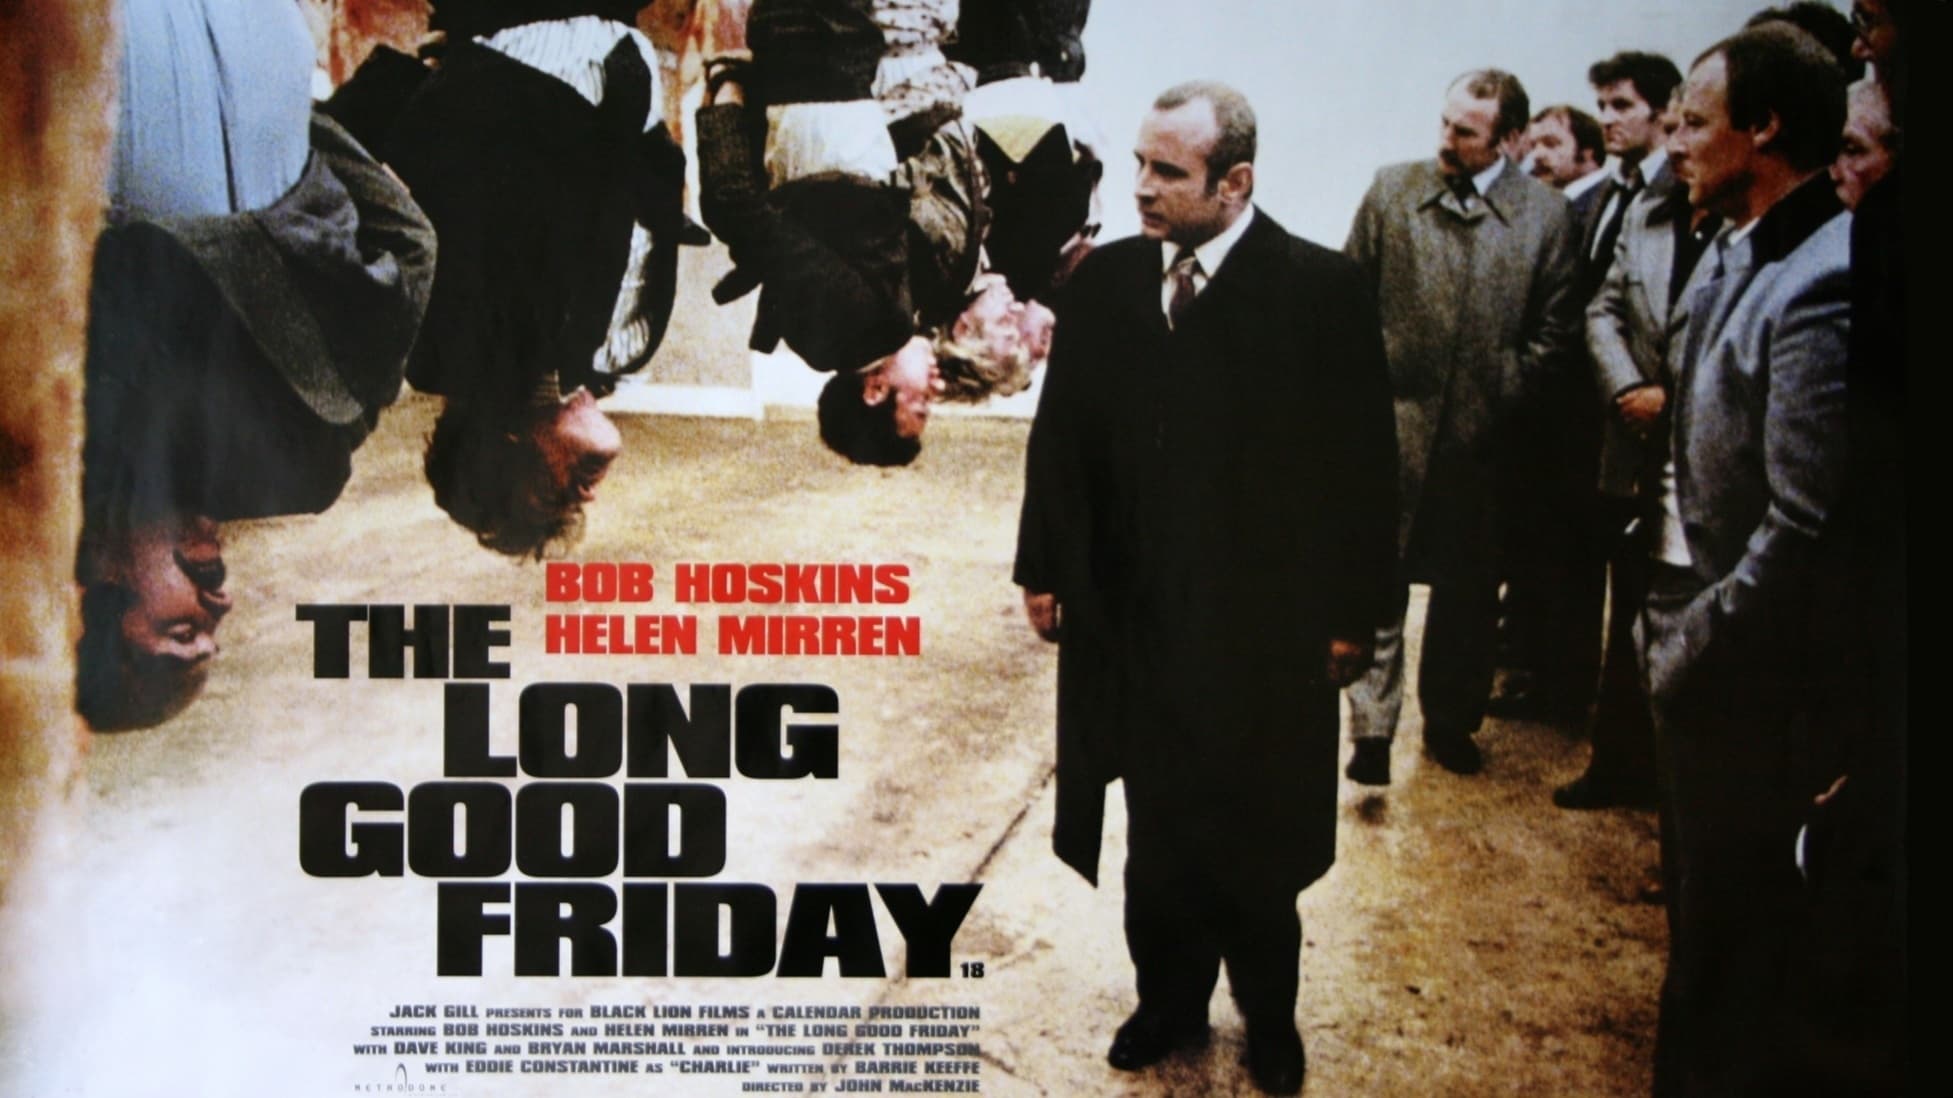 The Long Good Friday (1980)